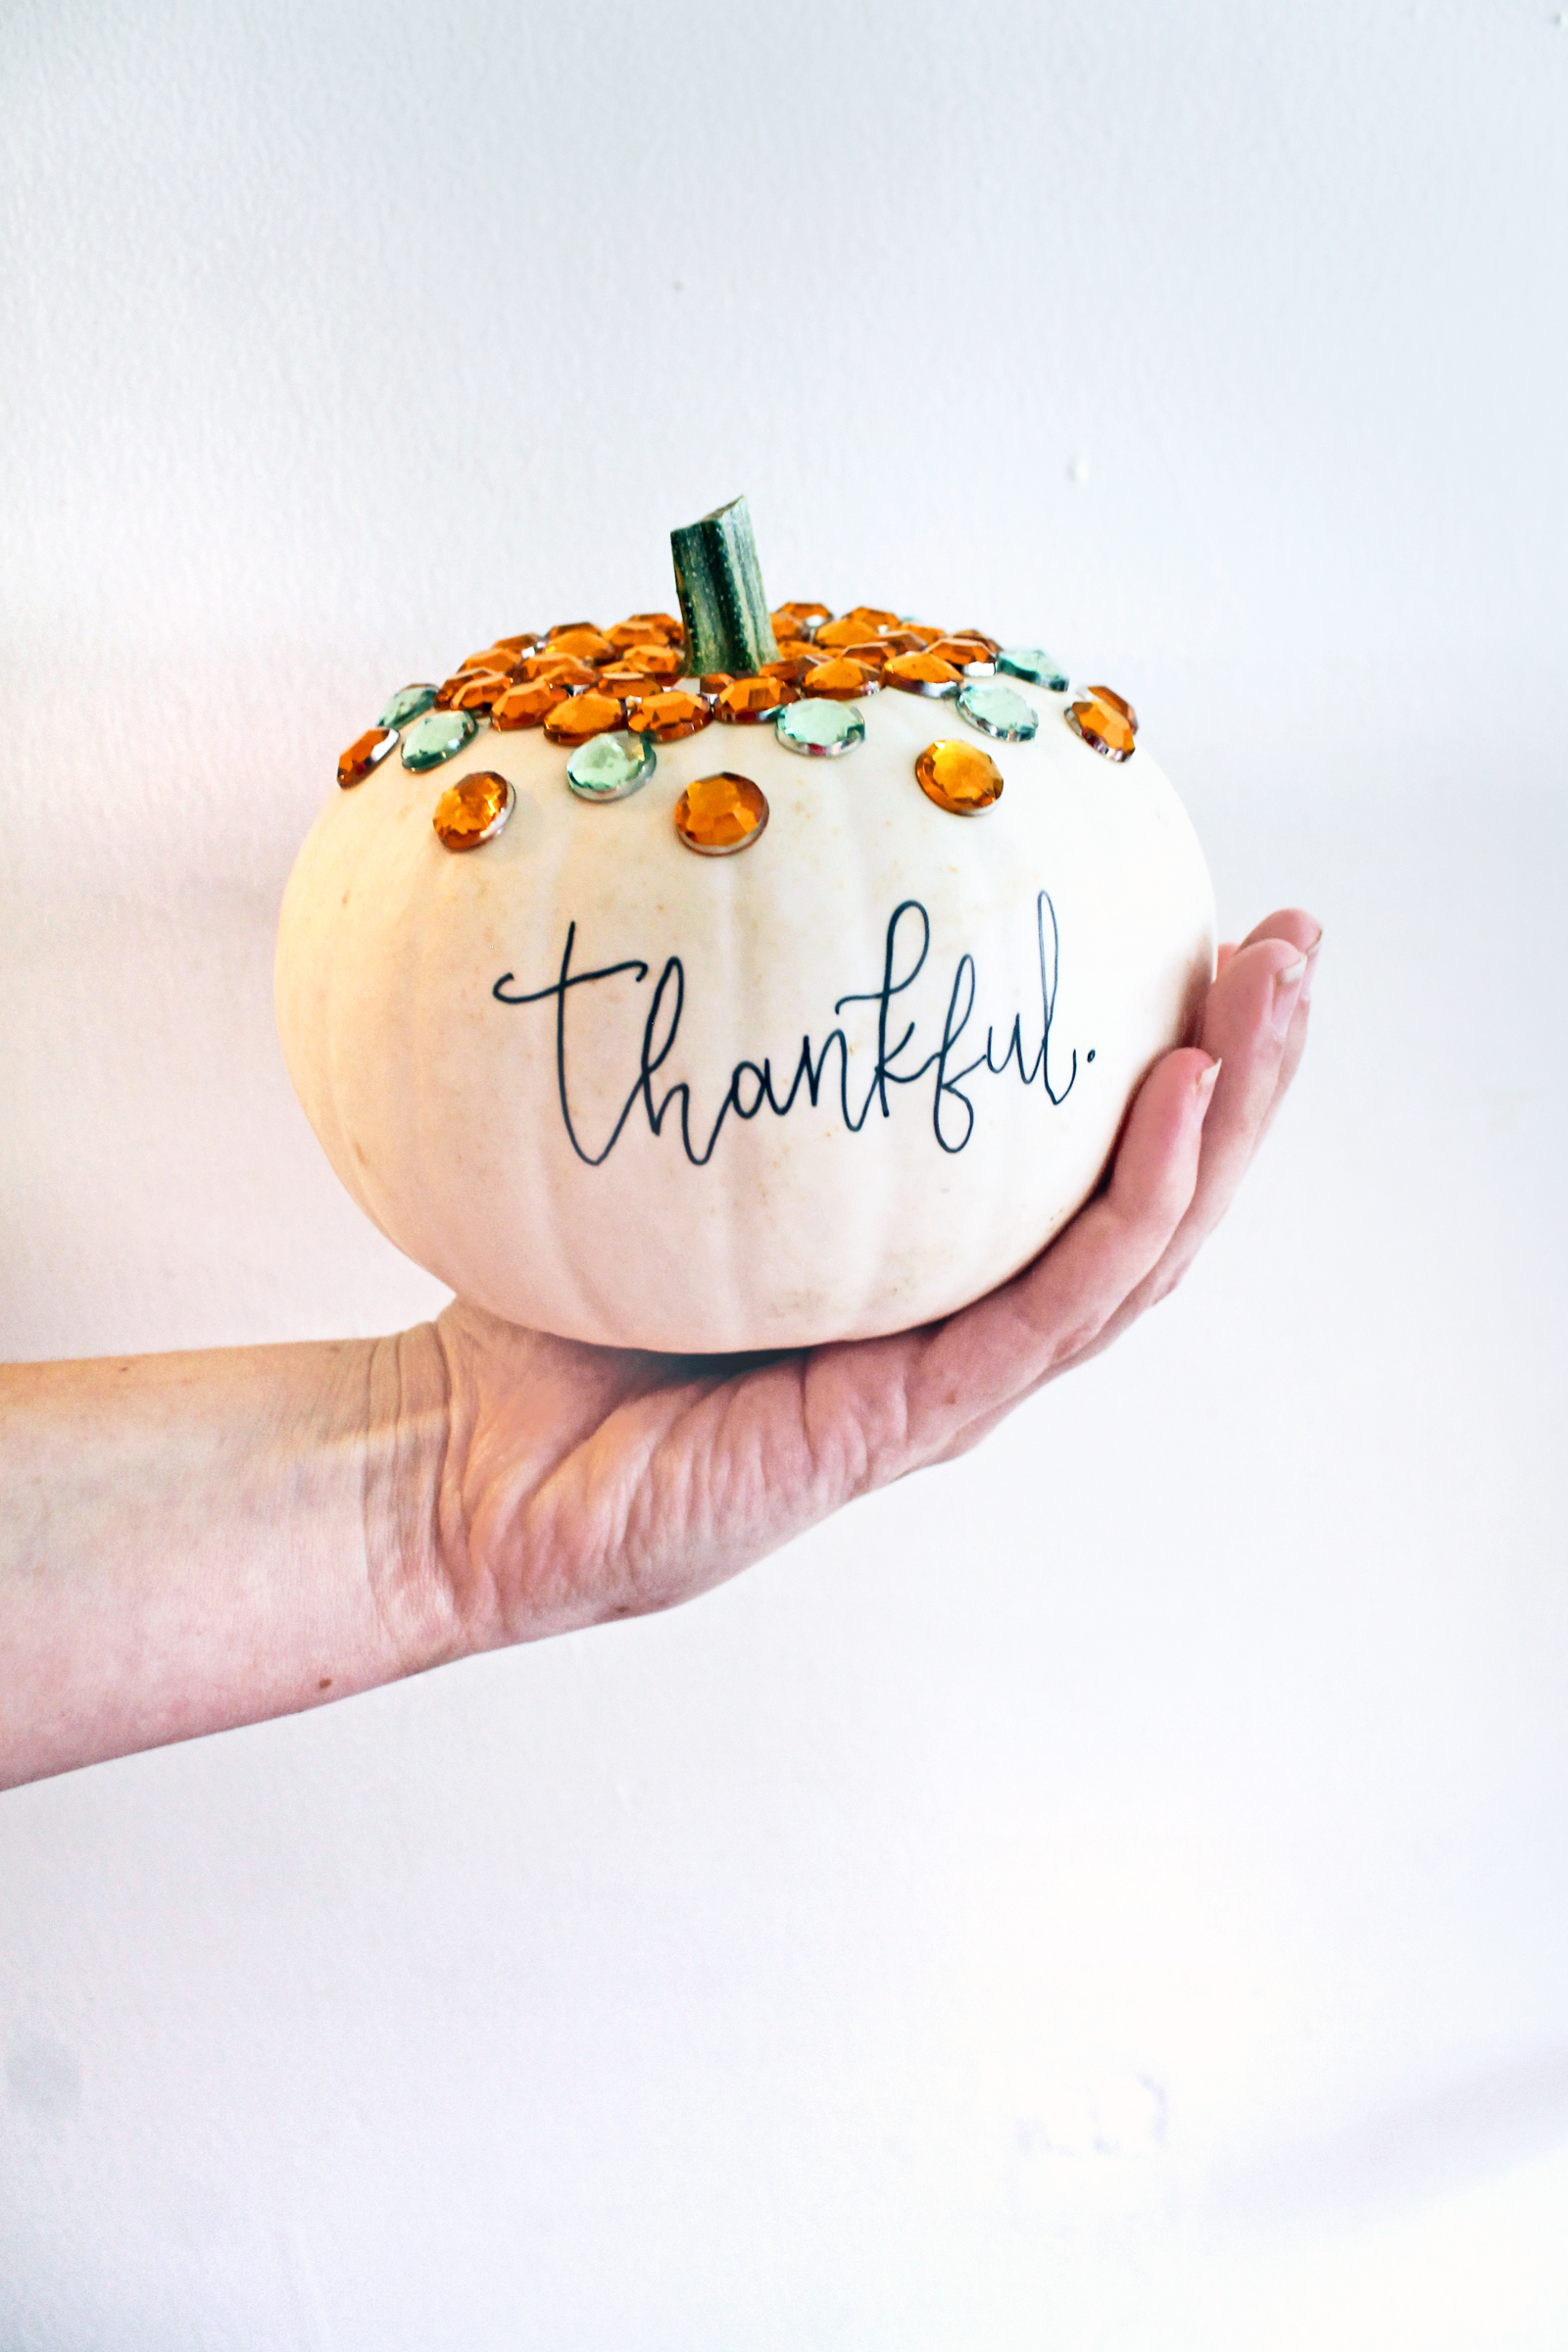 DIY Bling Pumpkins with a hand-lettered twist! Learn how to make these easy no-carve pumpkins with this tutorial from @studiokatie and @tombowusa #TombowUSA #halloweendiy #nocarvepumpkin